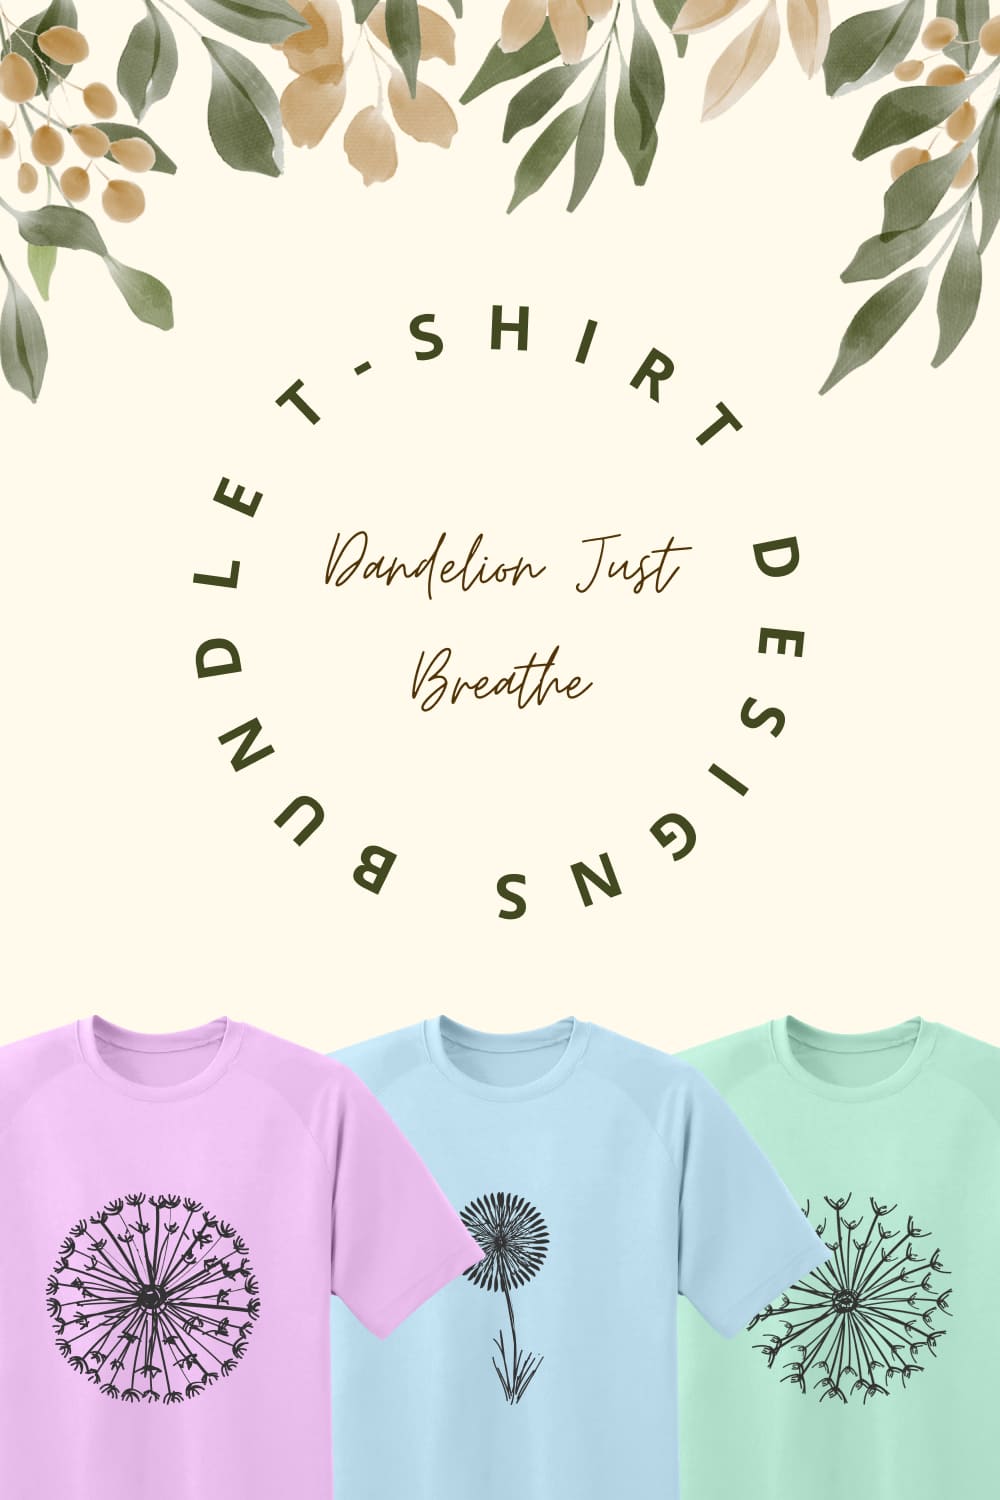 A pack of images of t-shirts with gorgeous dandelion prints.